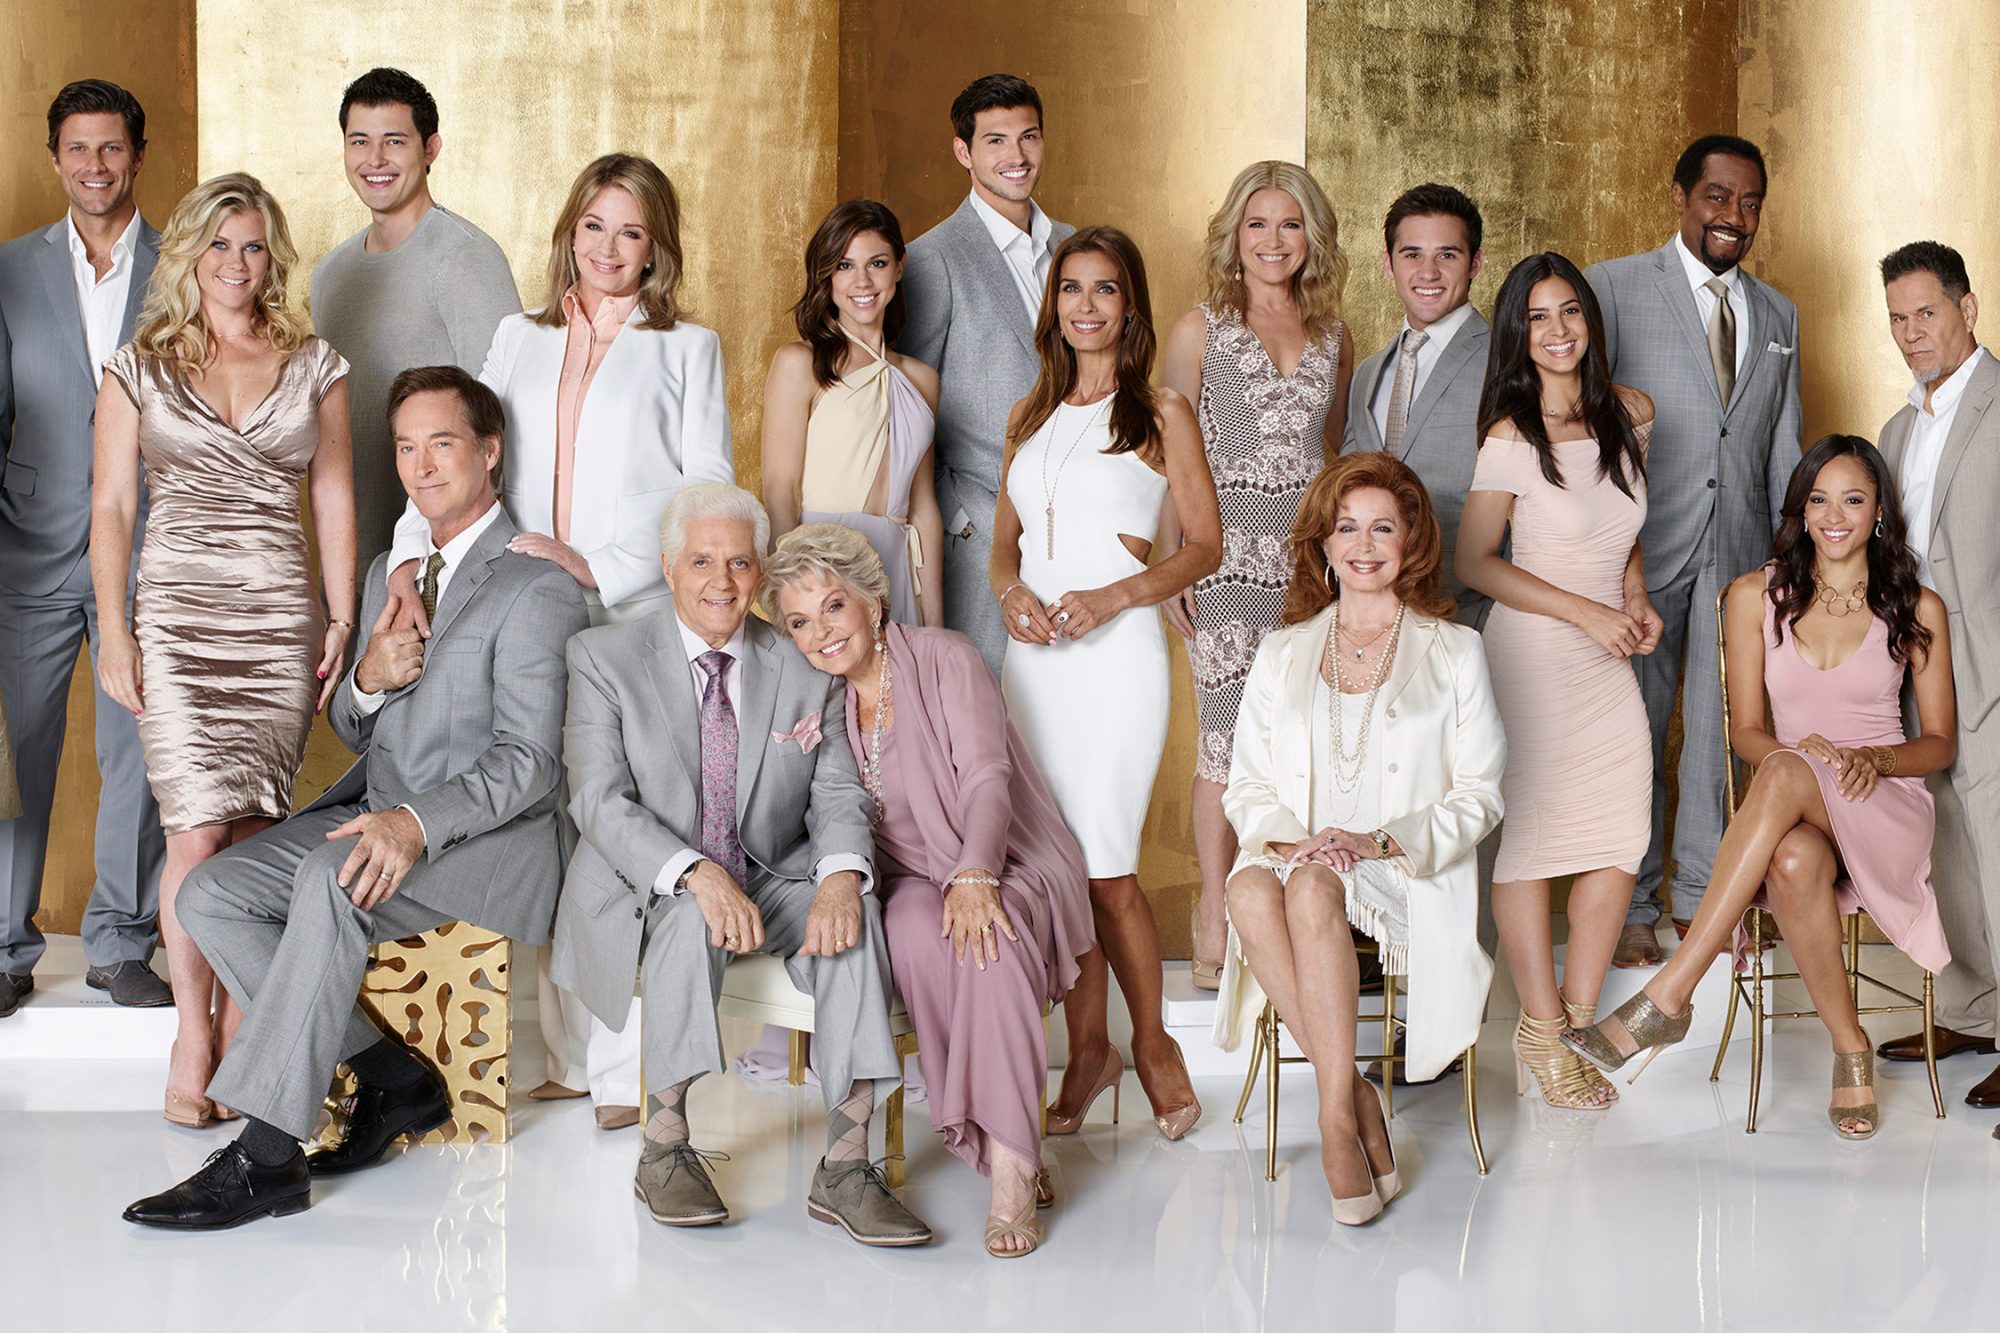 Days of Our Lives' could be coming to an end after 56 years.